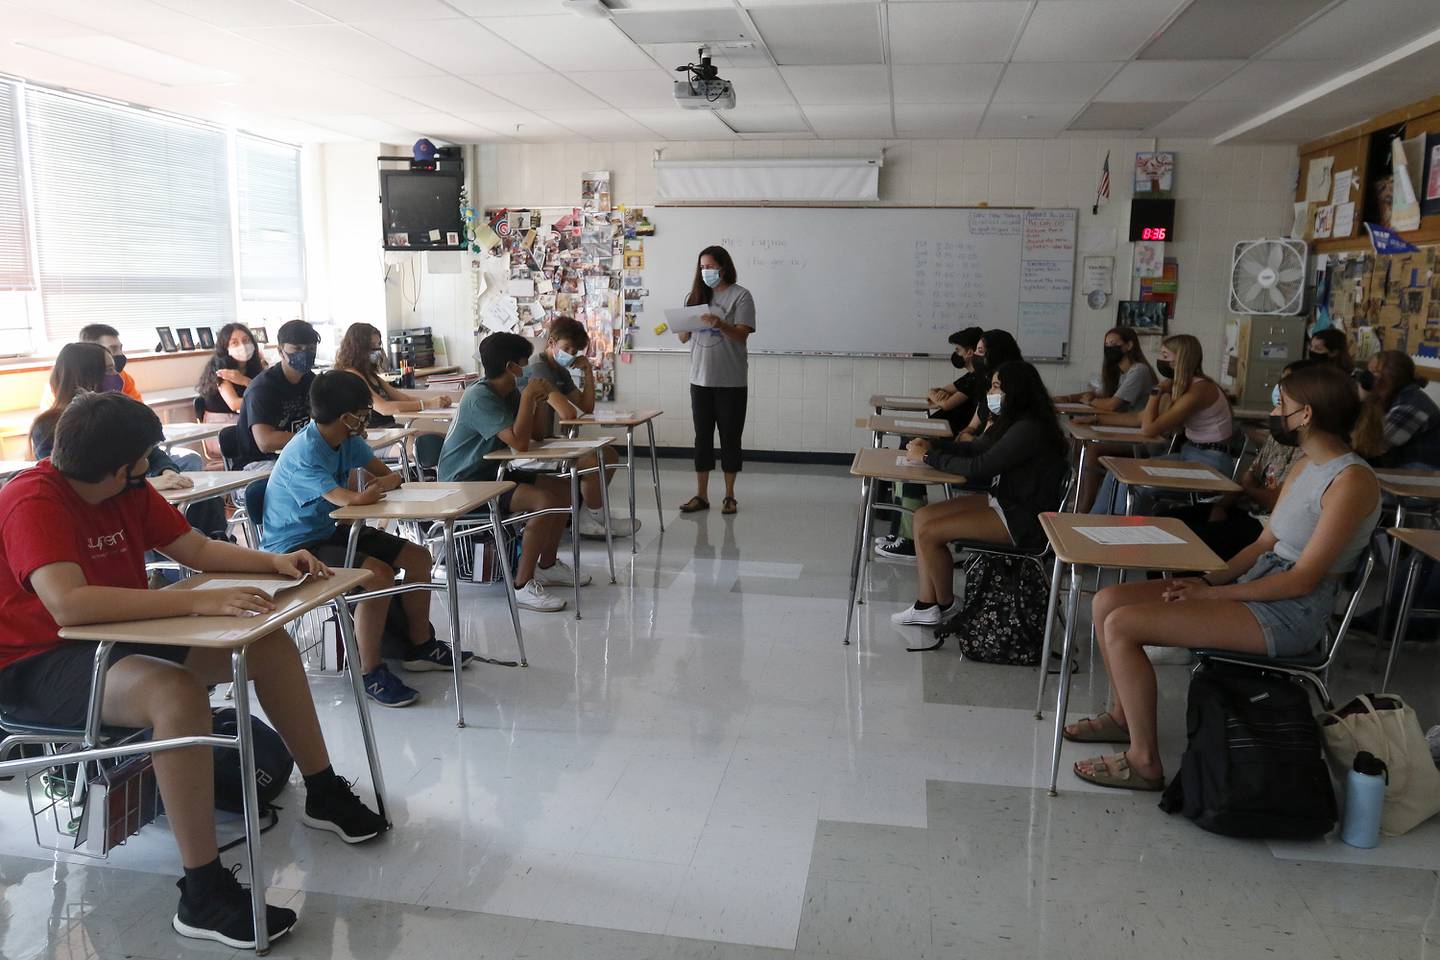 Teacher Bridget Fujino takes attendance in her Advanced Placement pre-calculus class during the first day back to school at Woodstock High School on Monday, Aug. 16, 2021, in Woodstock.